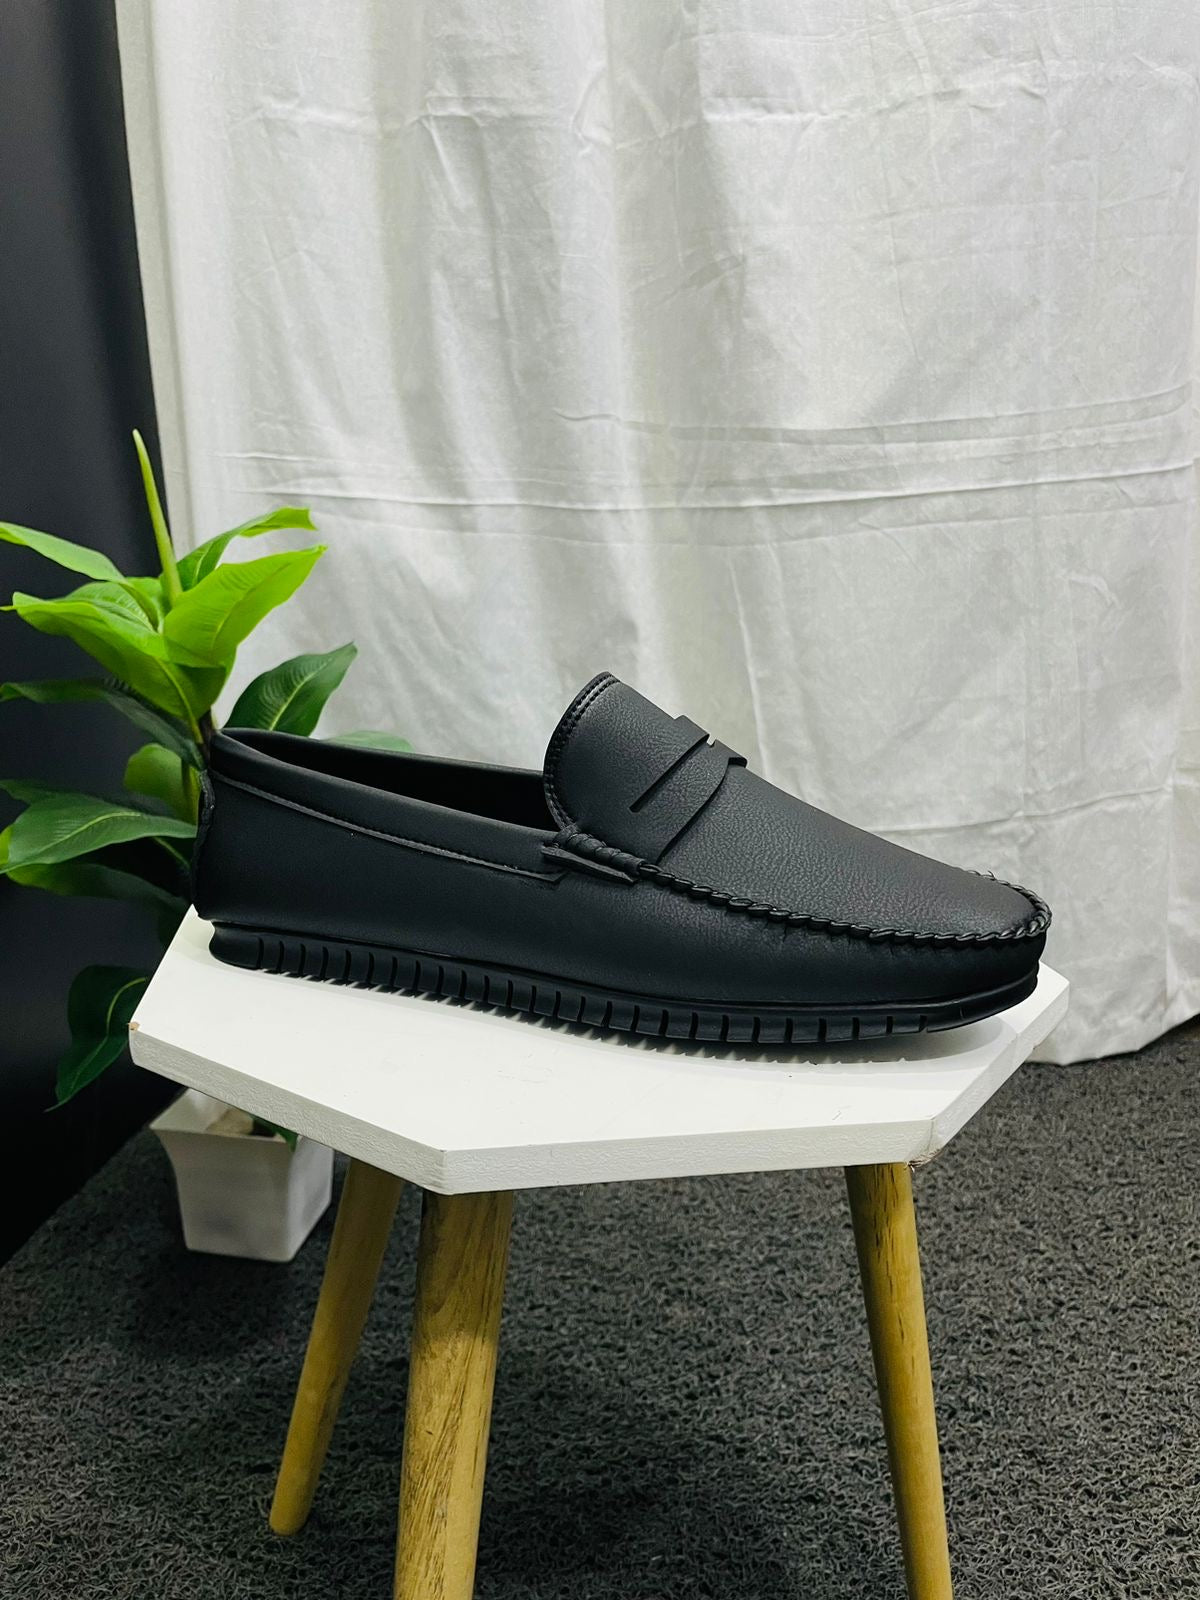 Men’s Simple Black Causal Loafers